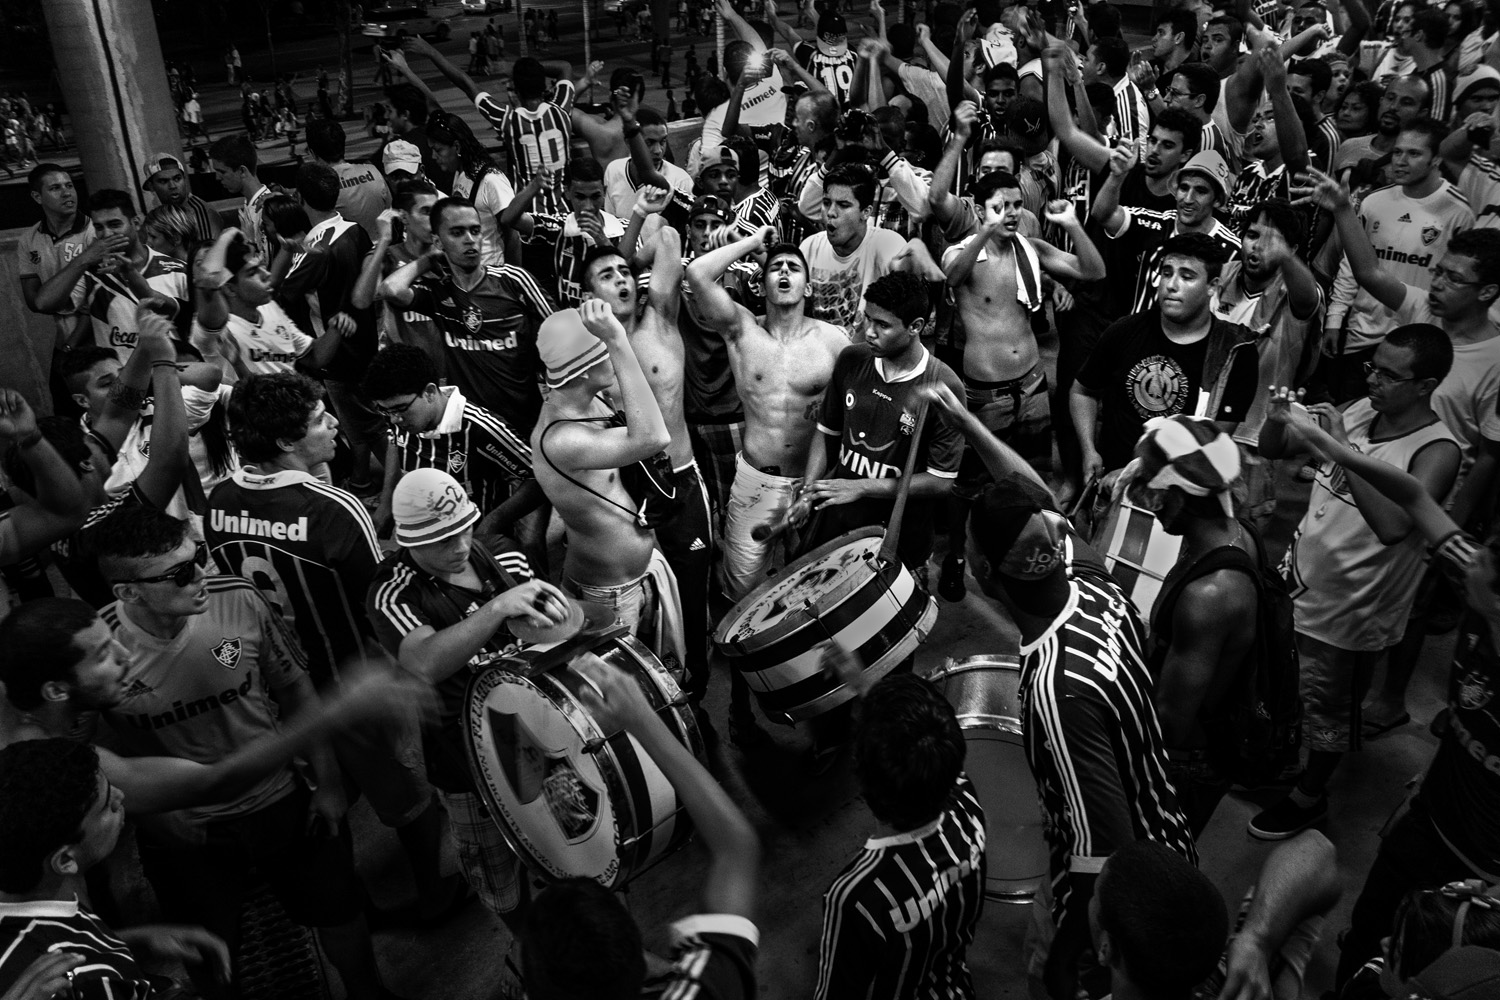 MARACANA STADIUM, RIO DE JANEIRO, BRAZIL - MAY 2014: Fluminense fans after at Maracana Stadium, celebrating after their team won in the cassical game with the Flamengo. (Photo by Sebastián Liste/ Reportage by Getty Images)